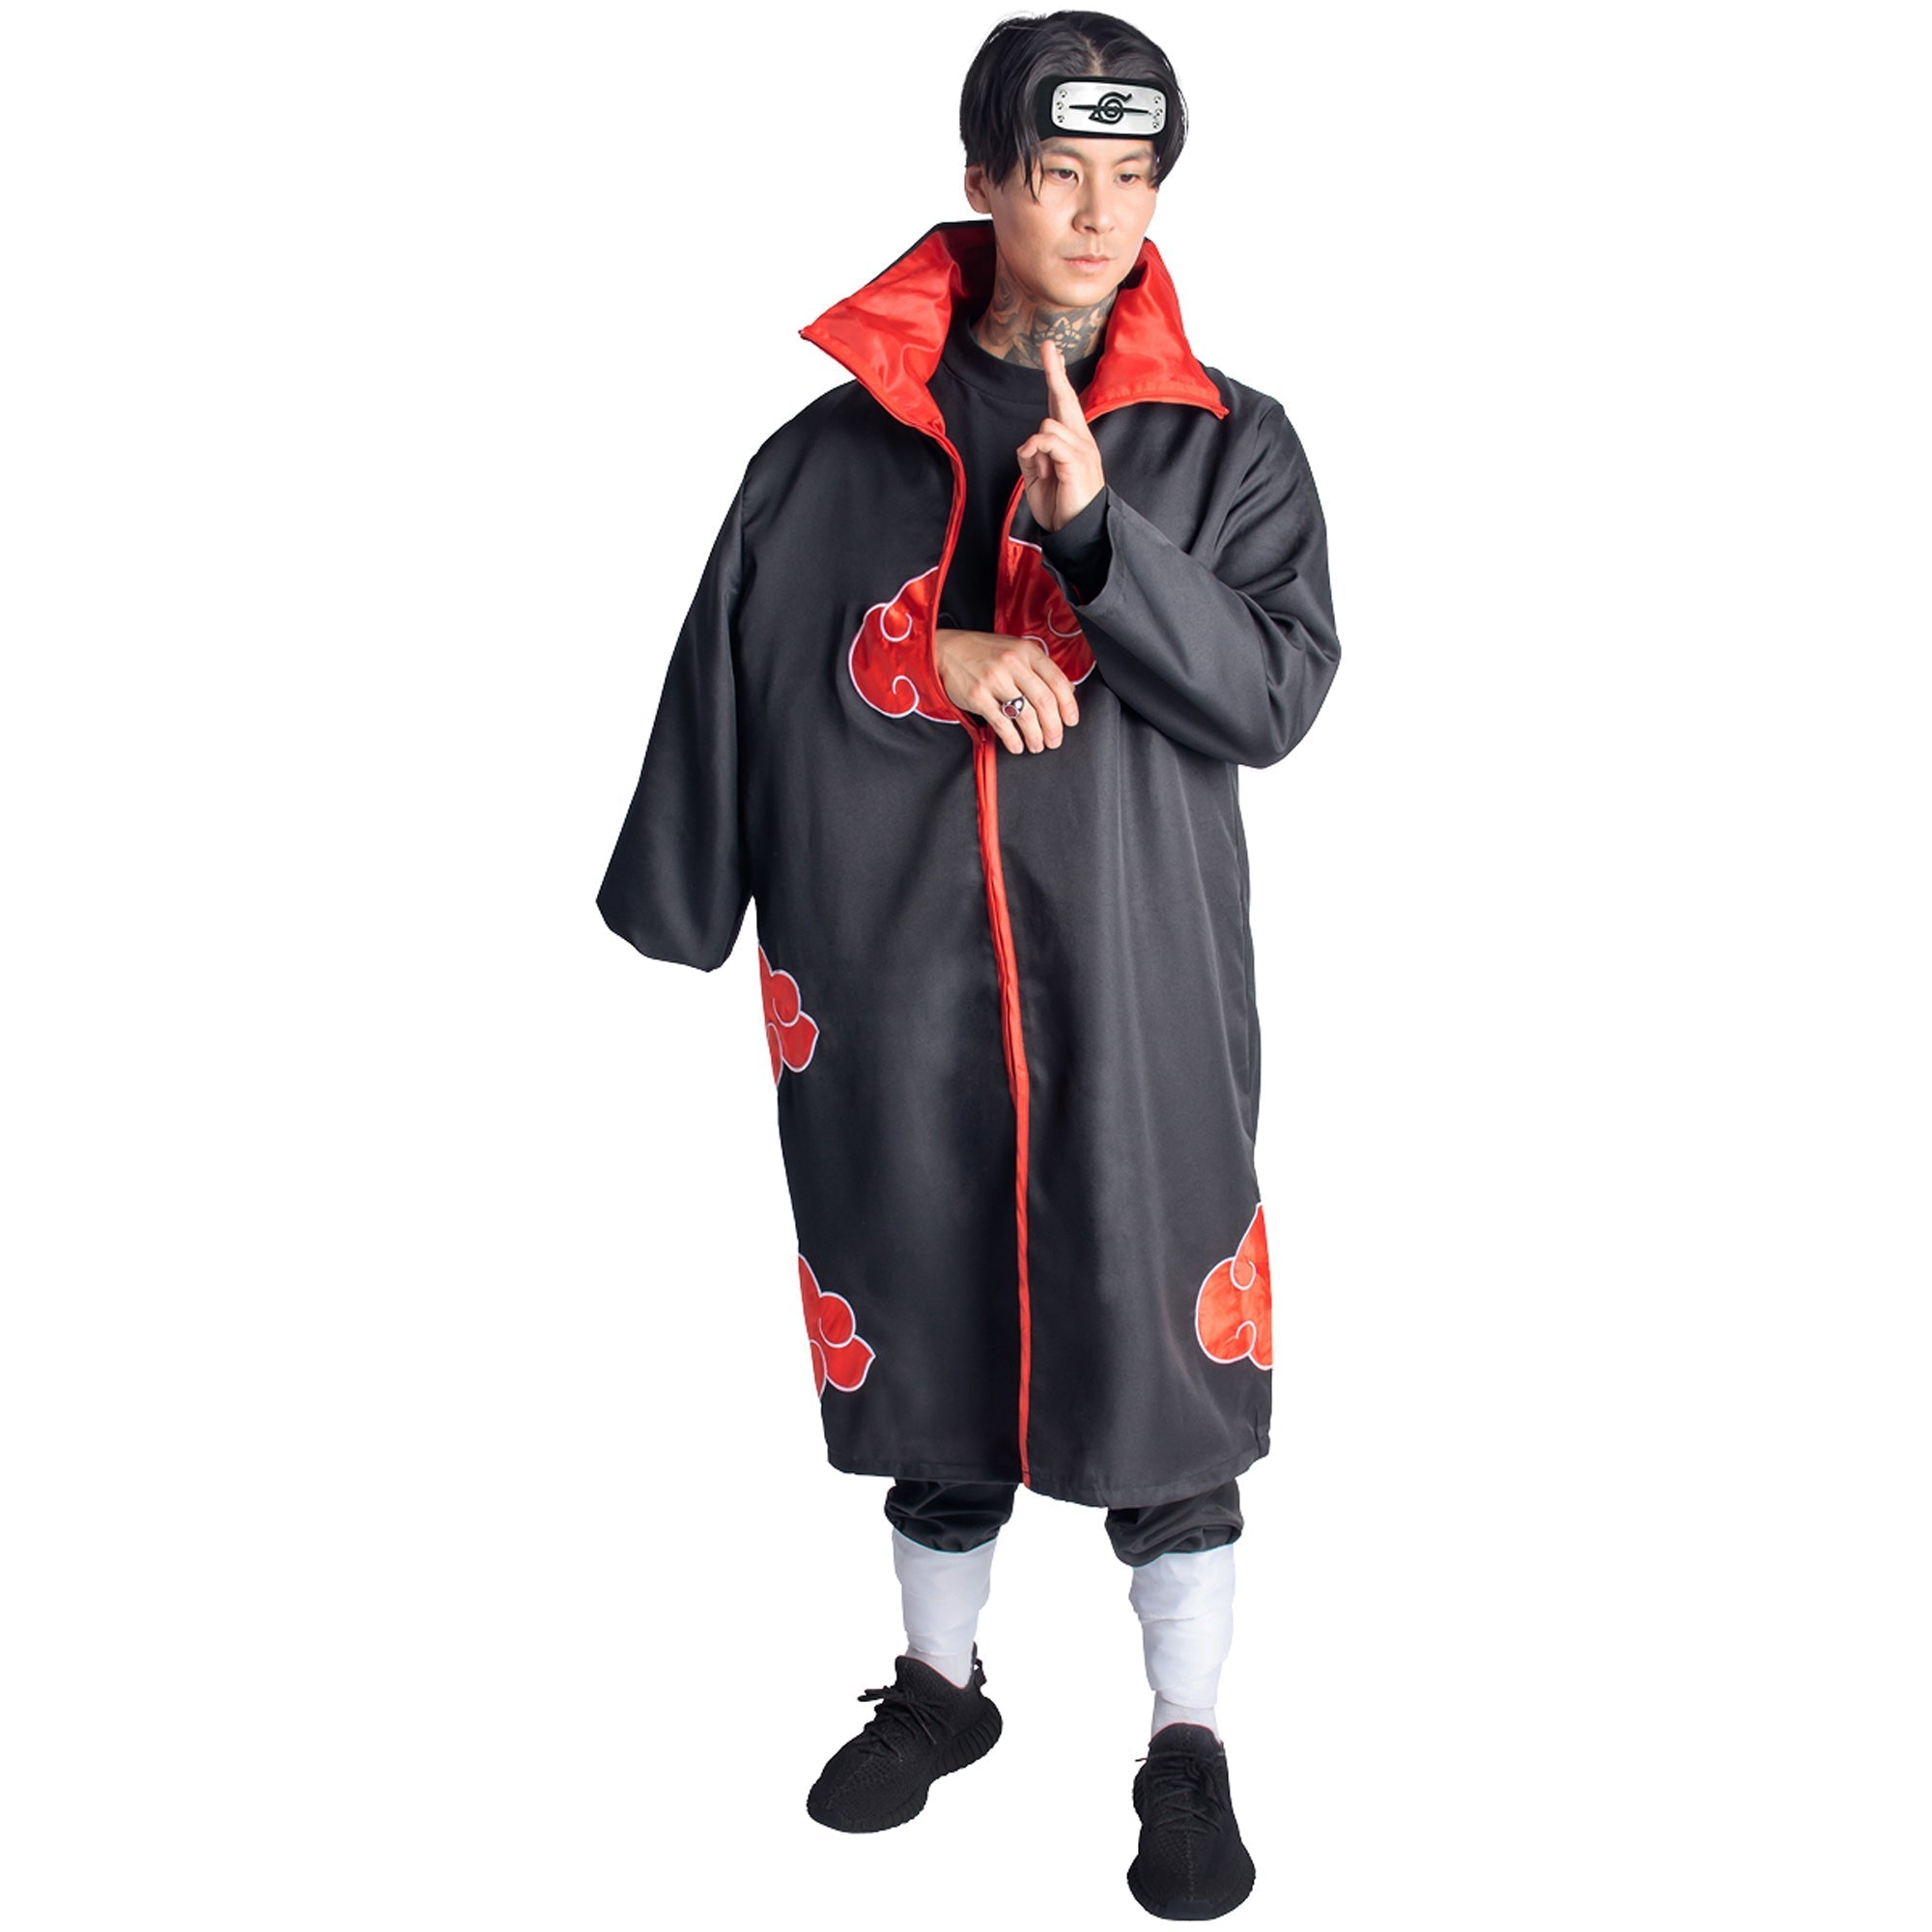 Amazoncom Spirit Halloween Adult Naruto Shippuden Costume  Officially  Licensed  Anime Cosplay  Naruto Cosplay  TV and Movie Costume   Clothing Shoes  Jewelry